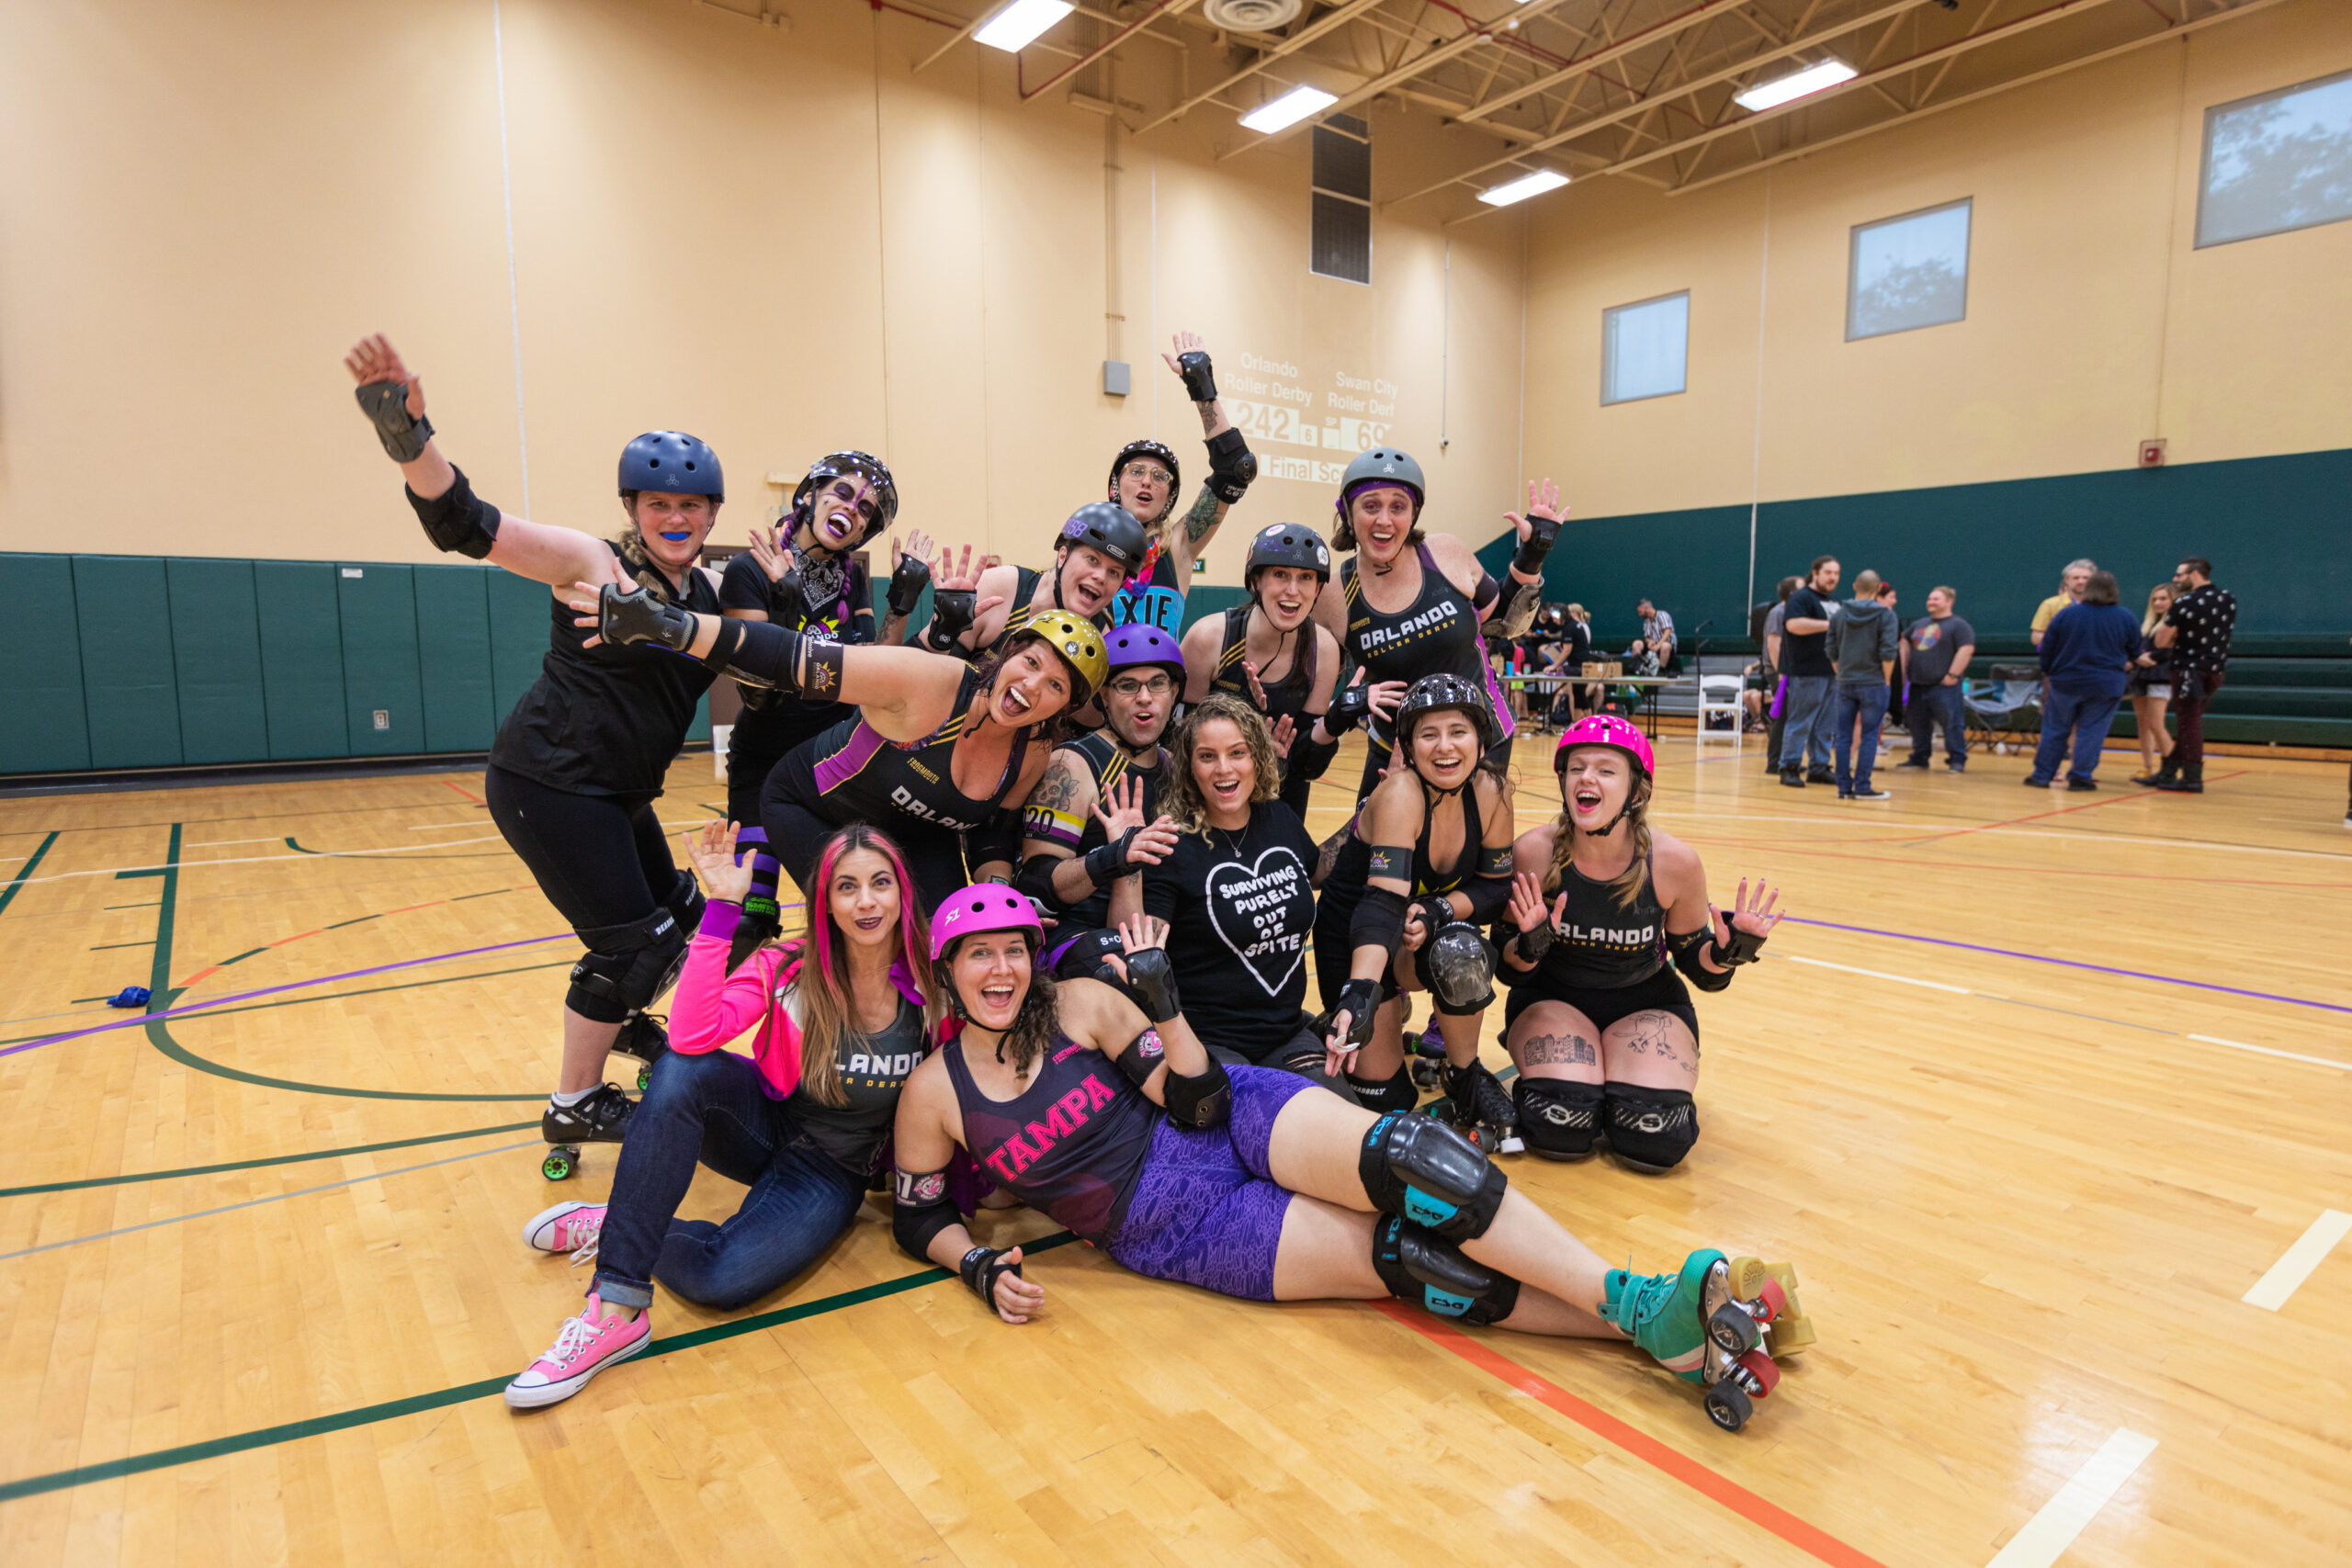 Calling all roller derby leagues!